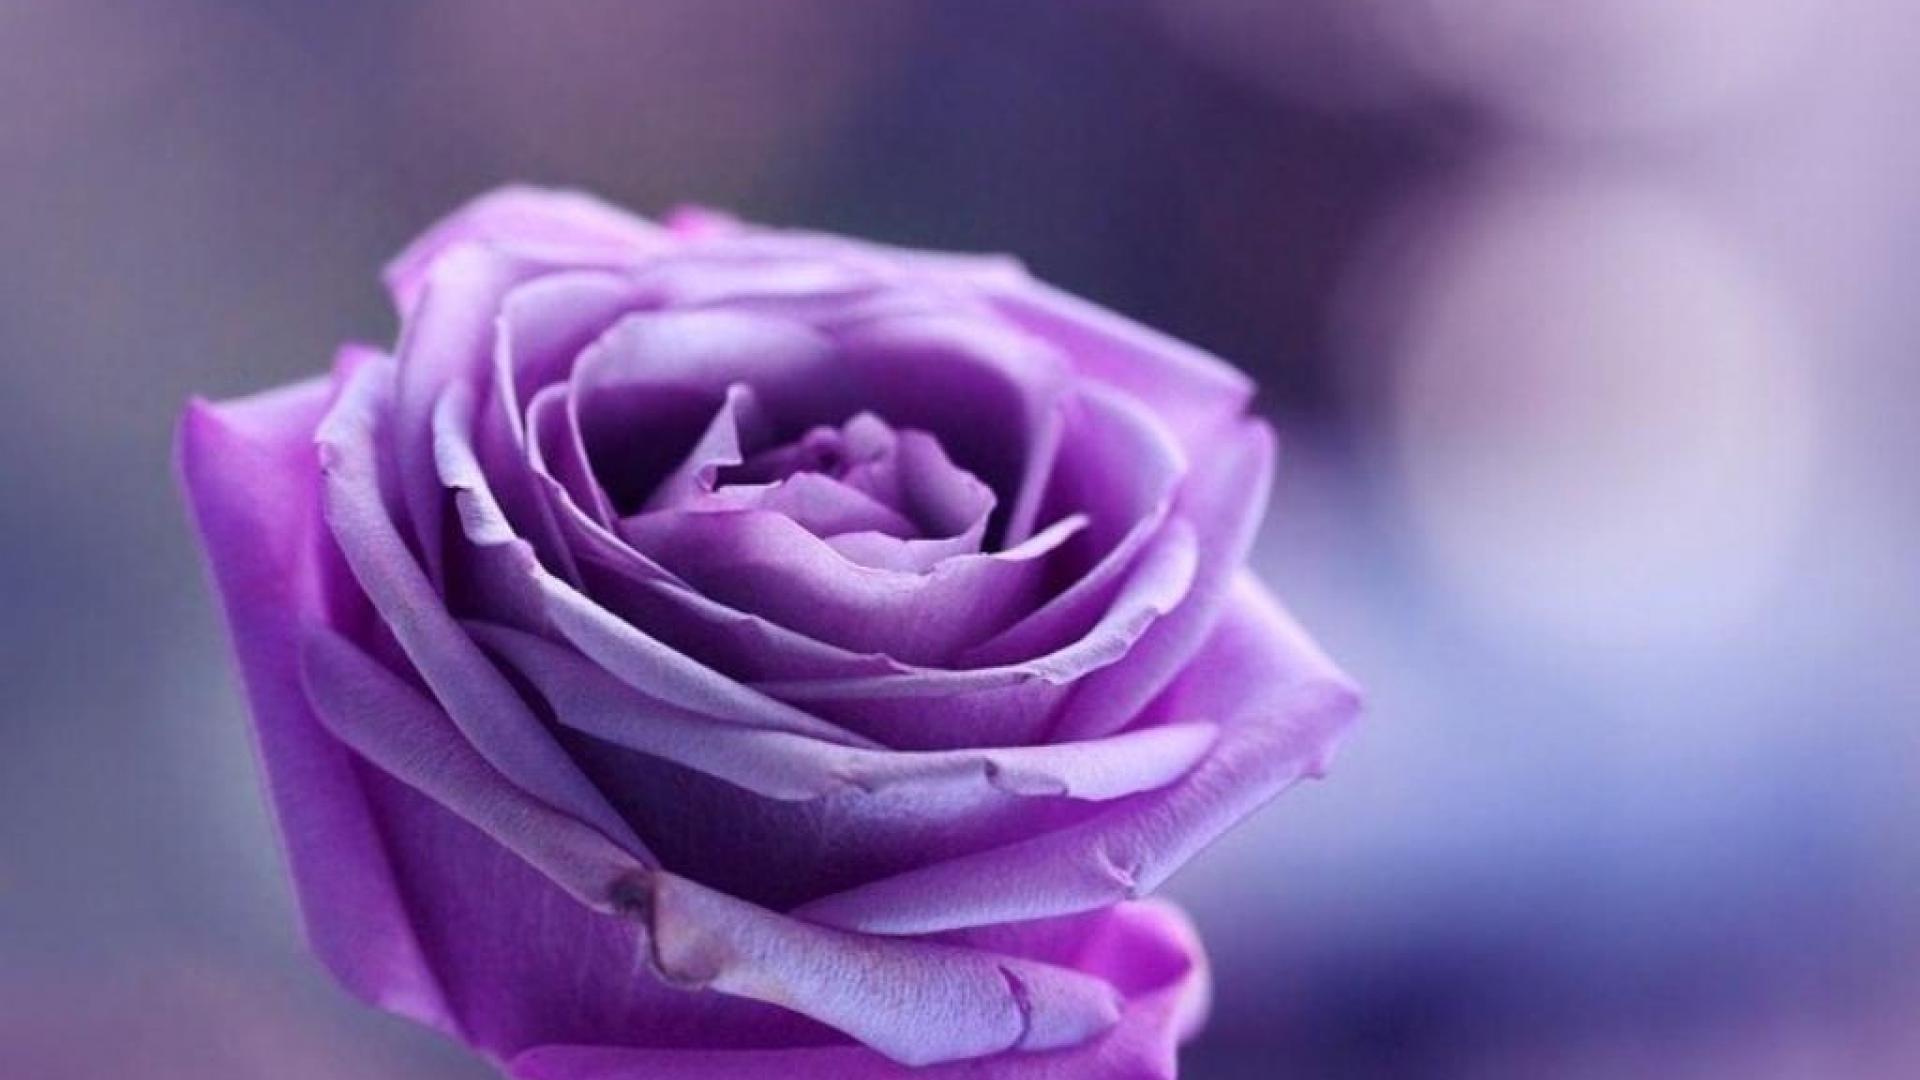 Purple Roses Background   Wallpaper High Definition High Quality